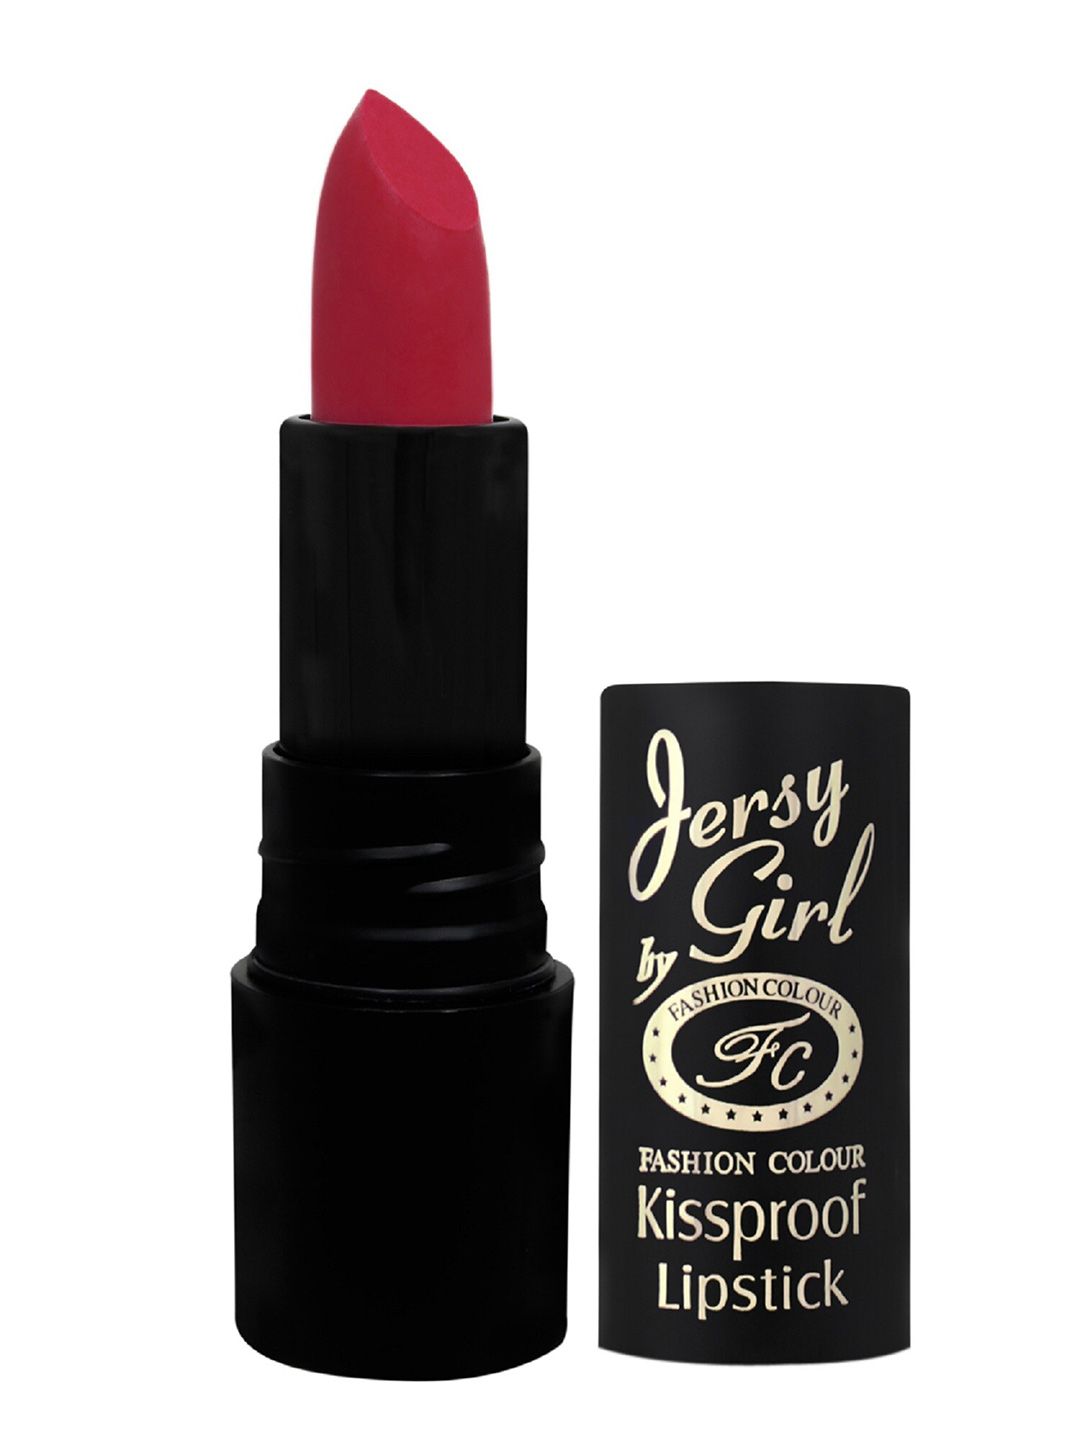 Fashion Colour Jersy Girl Kiss Proof Lipstick - Lilac Red 9 3.8gm Price in India